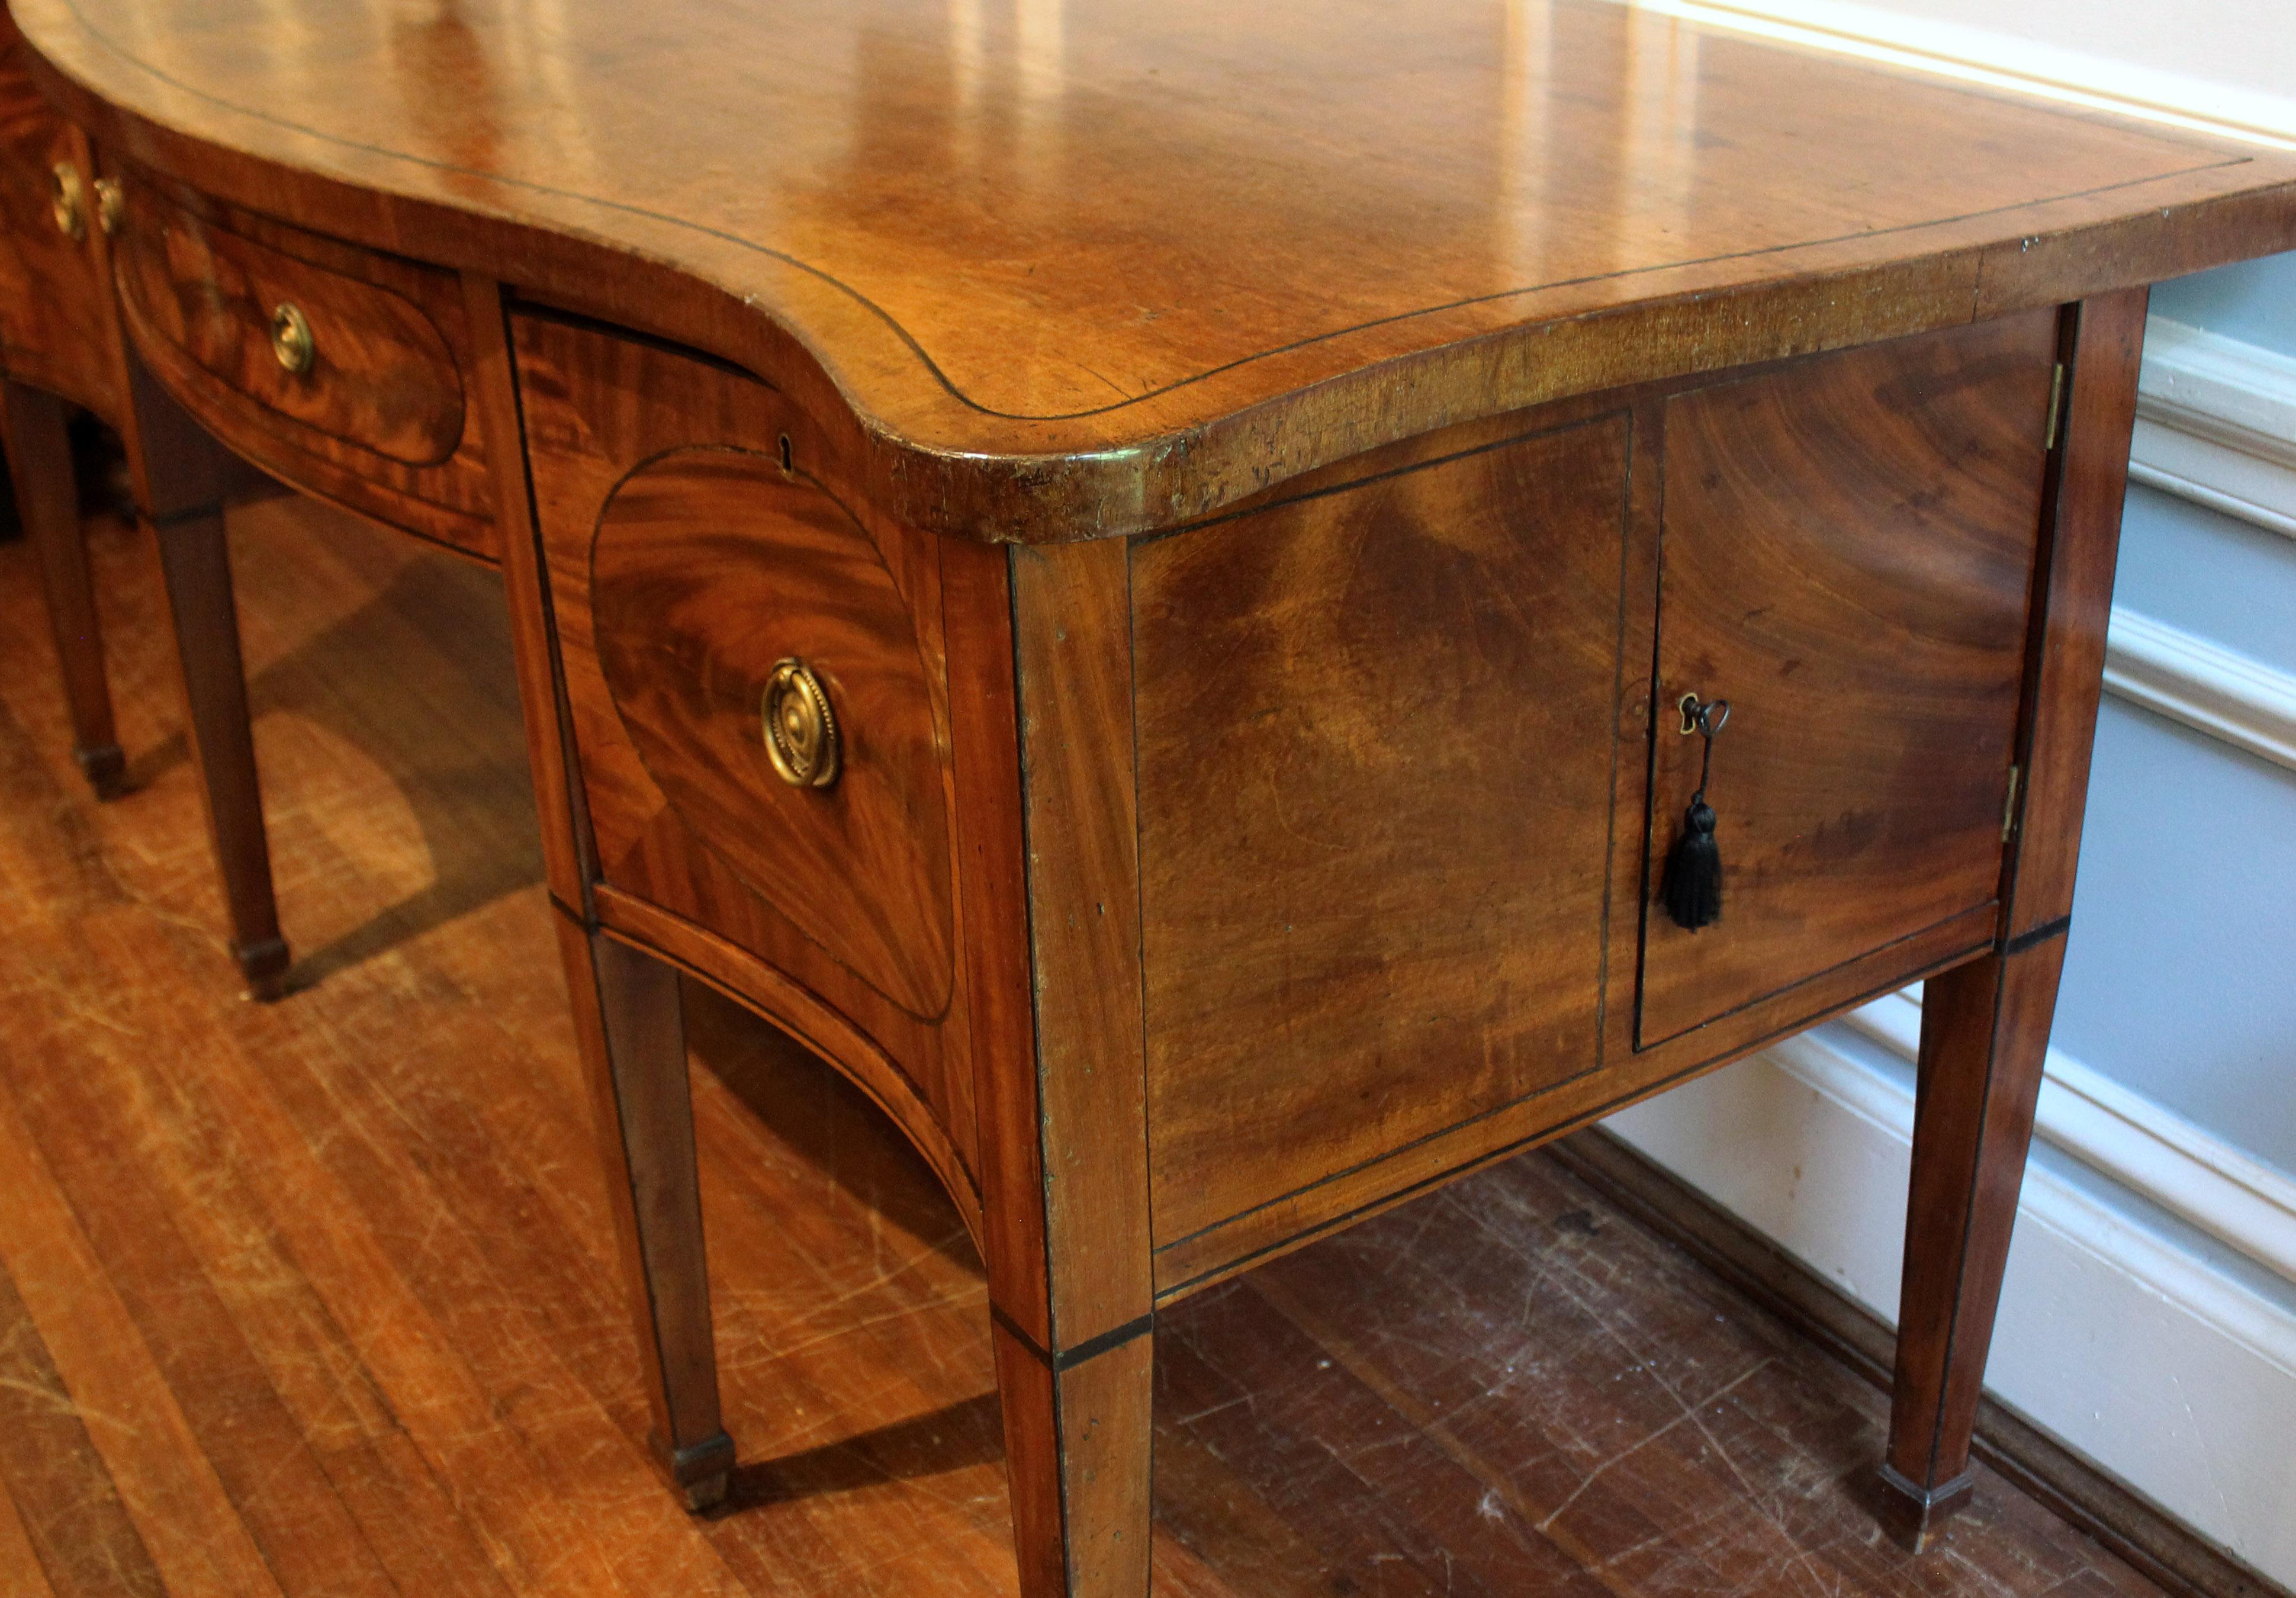 Oak Late 18th to Early 19th Century English Serpentine Form Sideboard For Sale